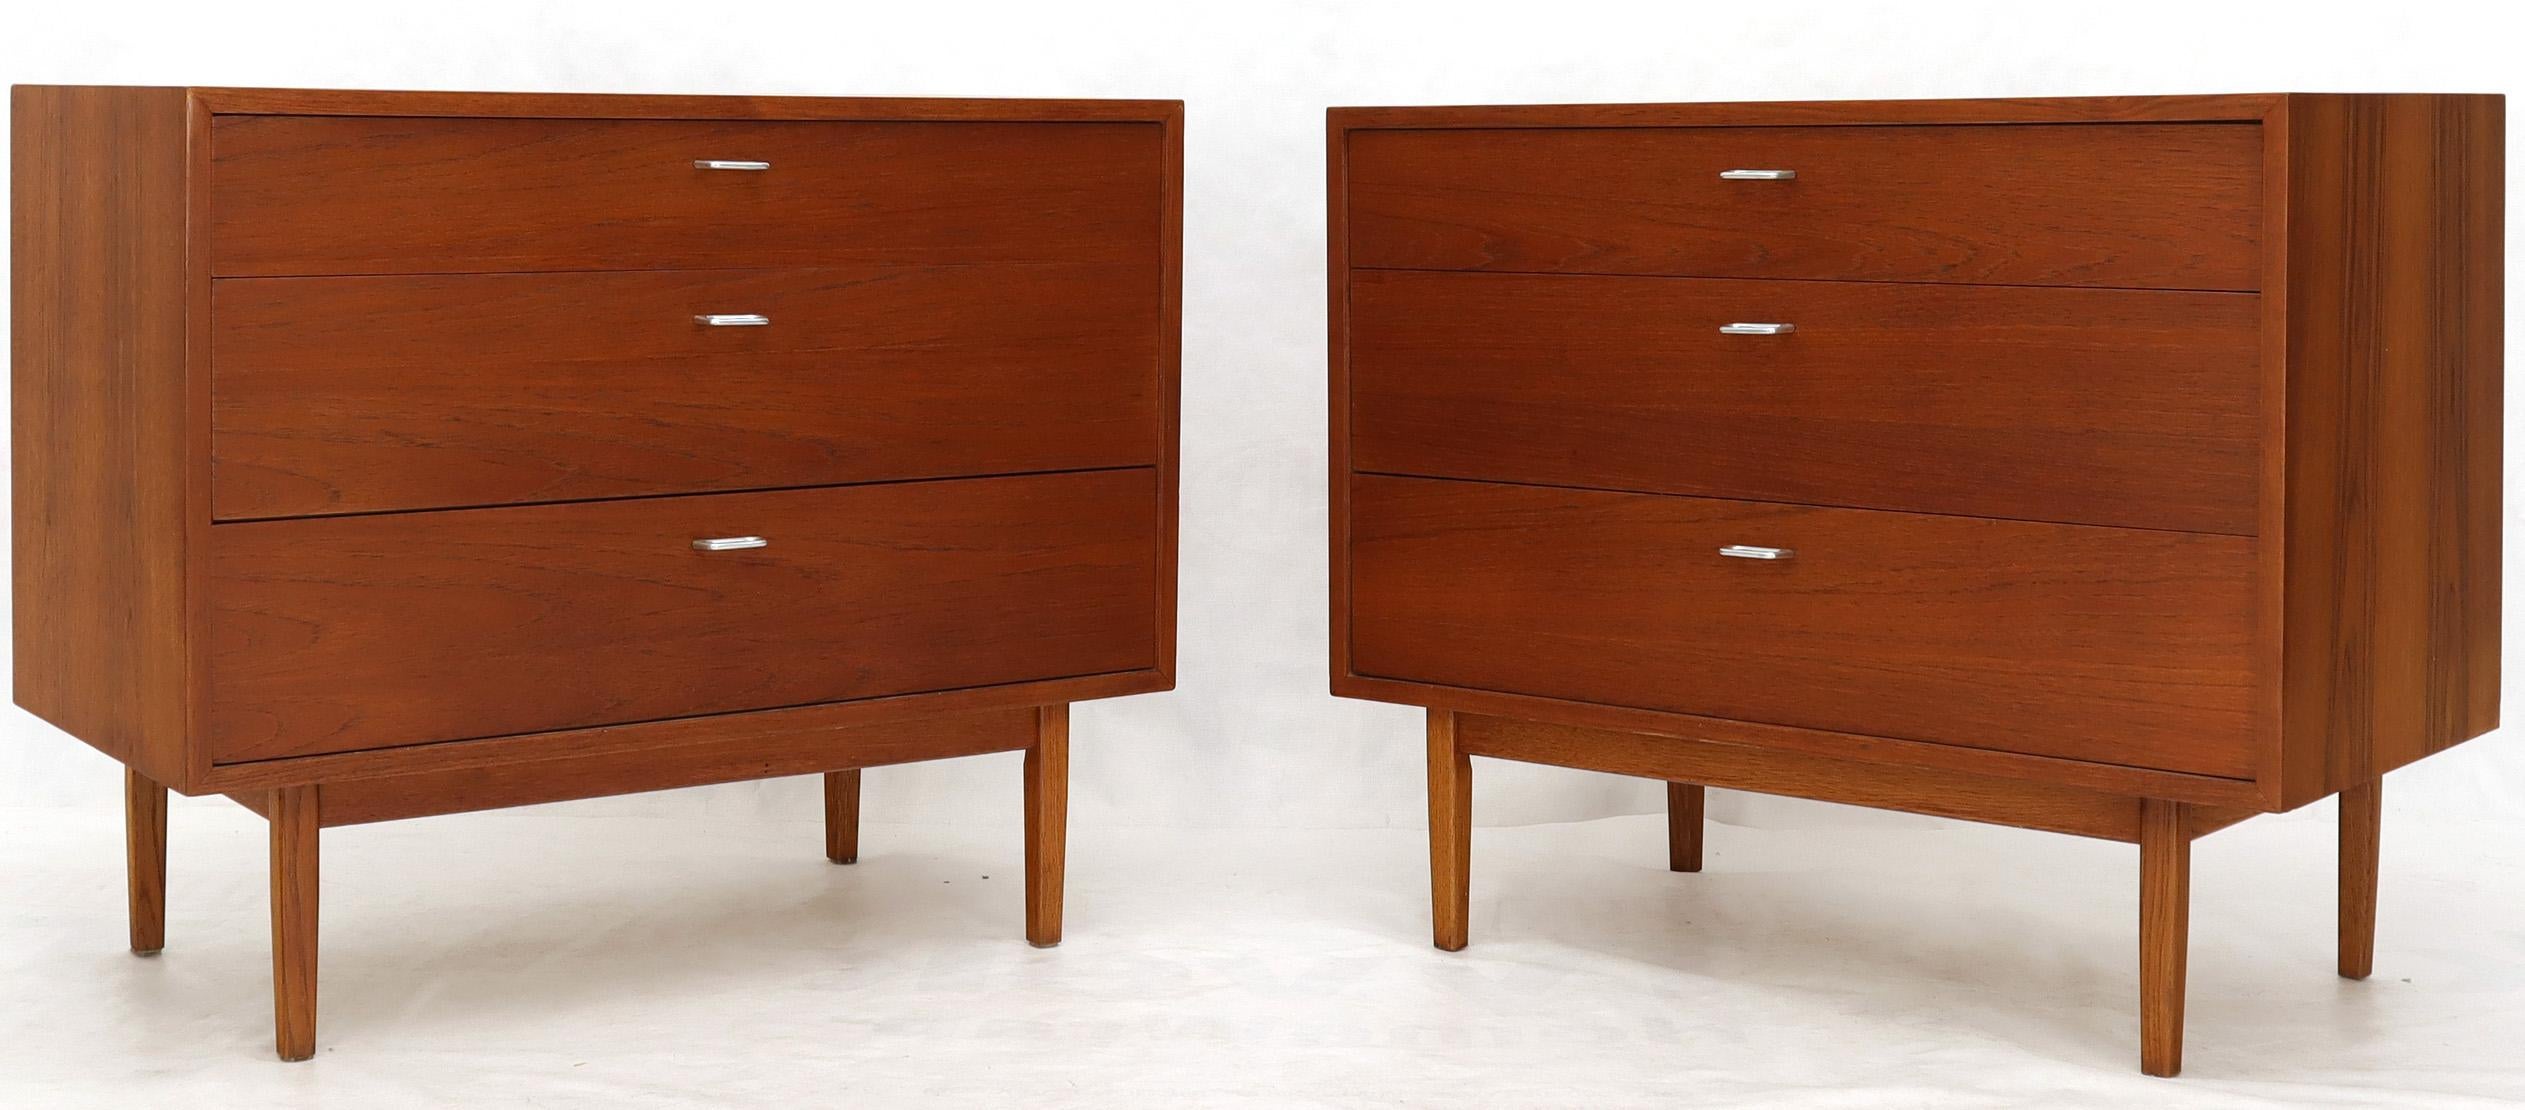 Pair of Mid-Century Modern three-drawer bachelor chests dressers credenzas on tall tapered legs. 